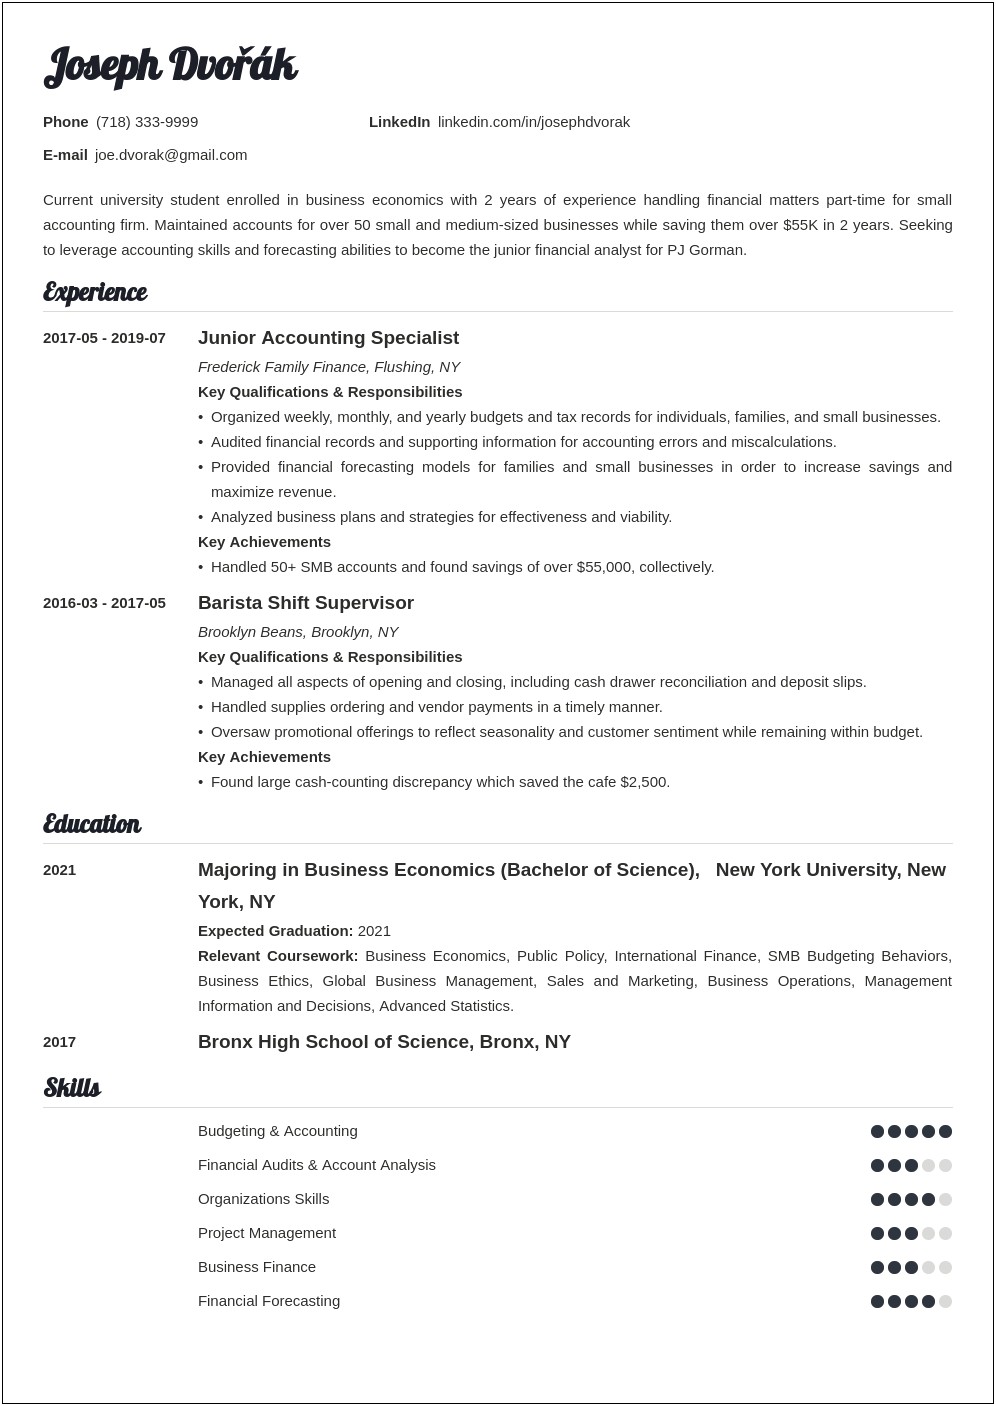 Resume Objective For A Business Major Student